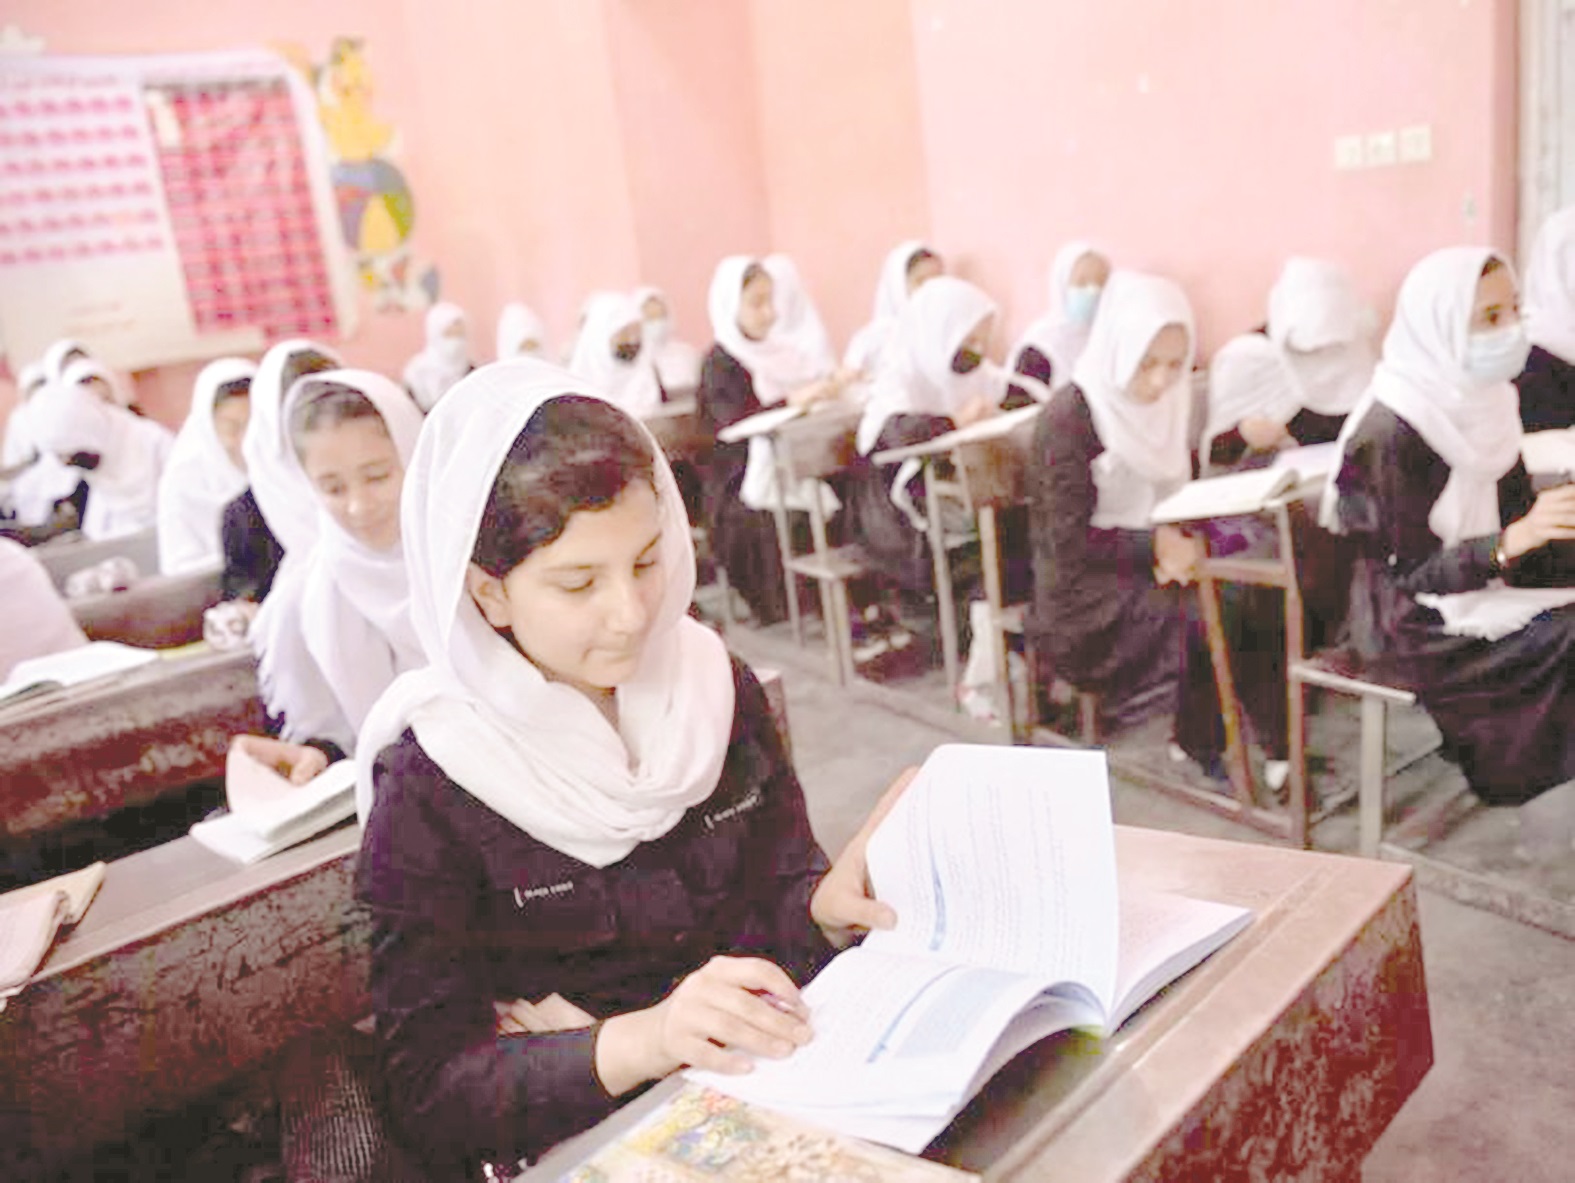 Taliban to announce plans for girls’ education soon: UN